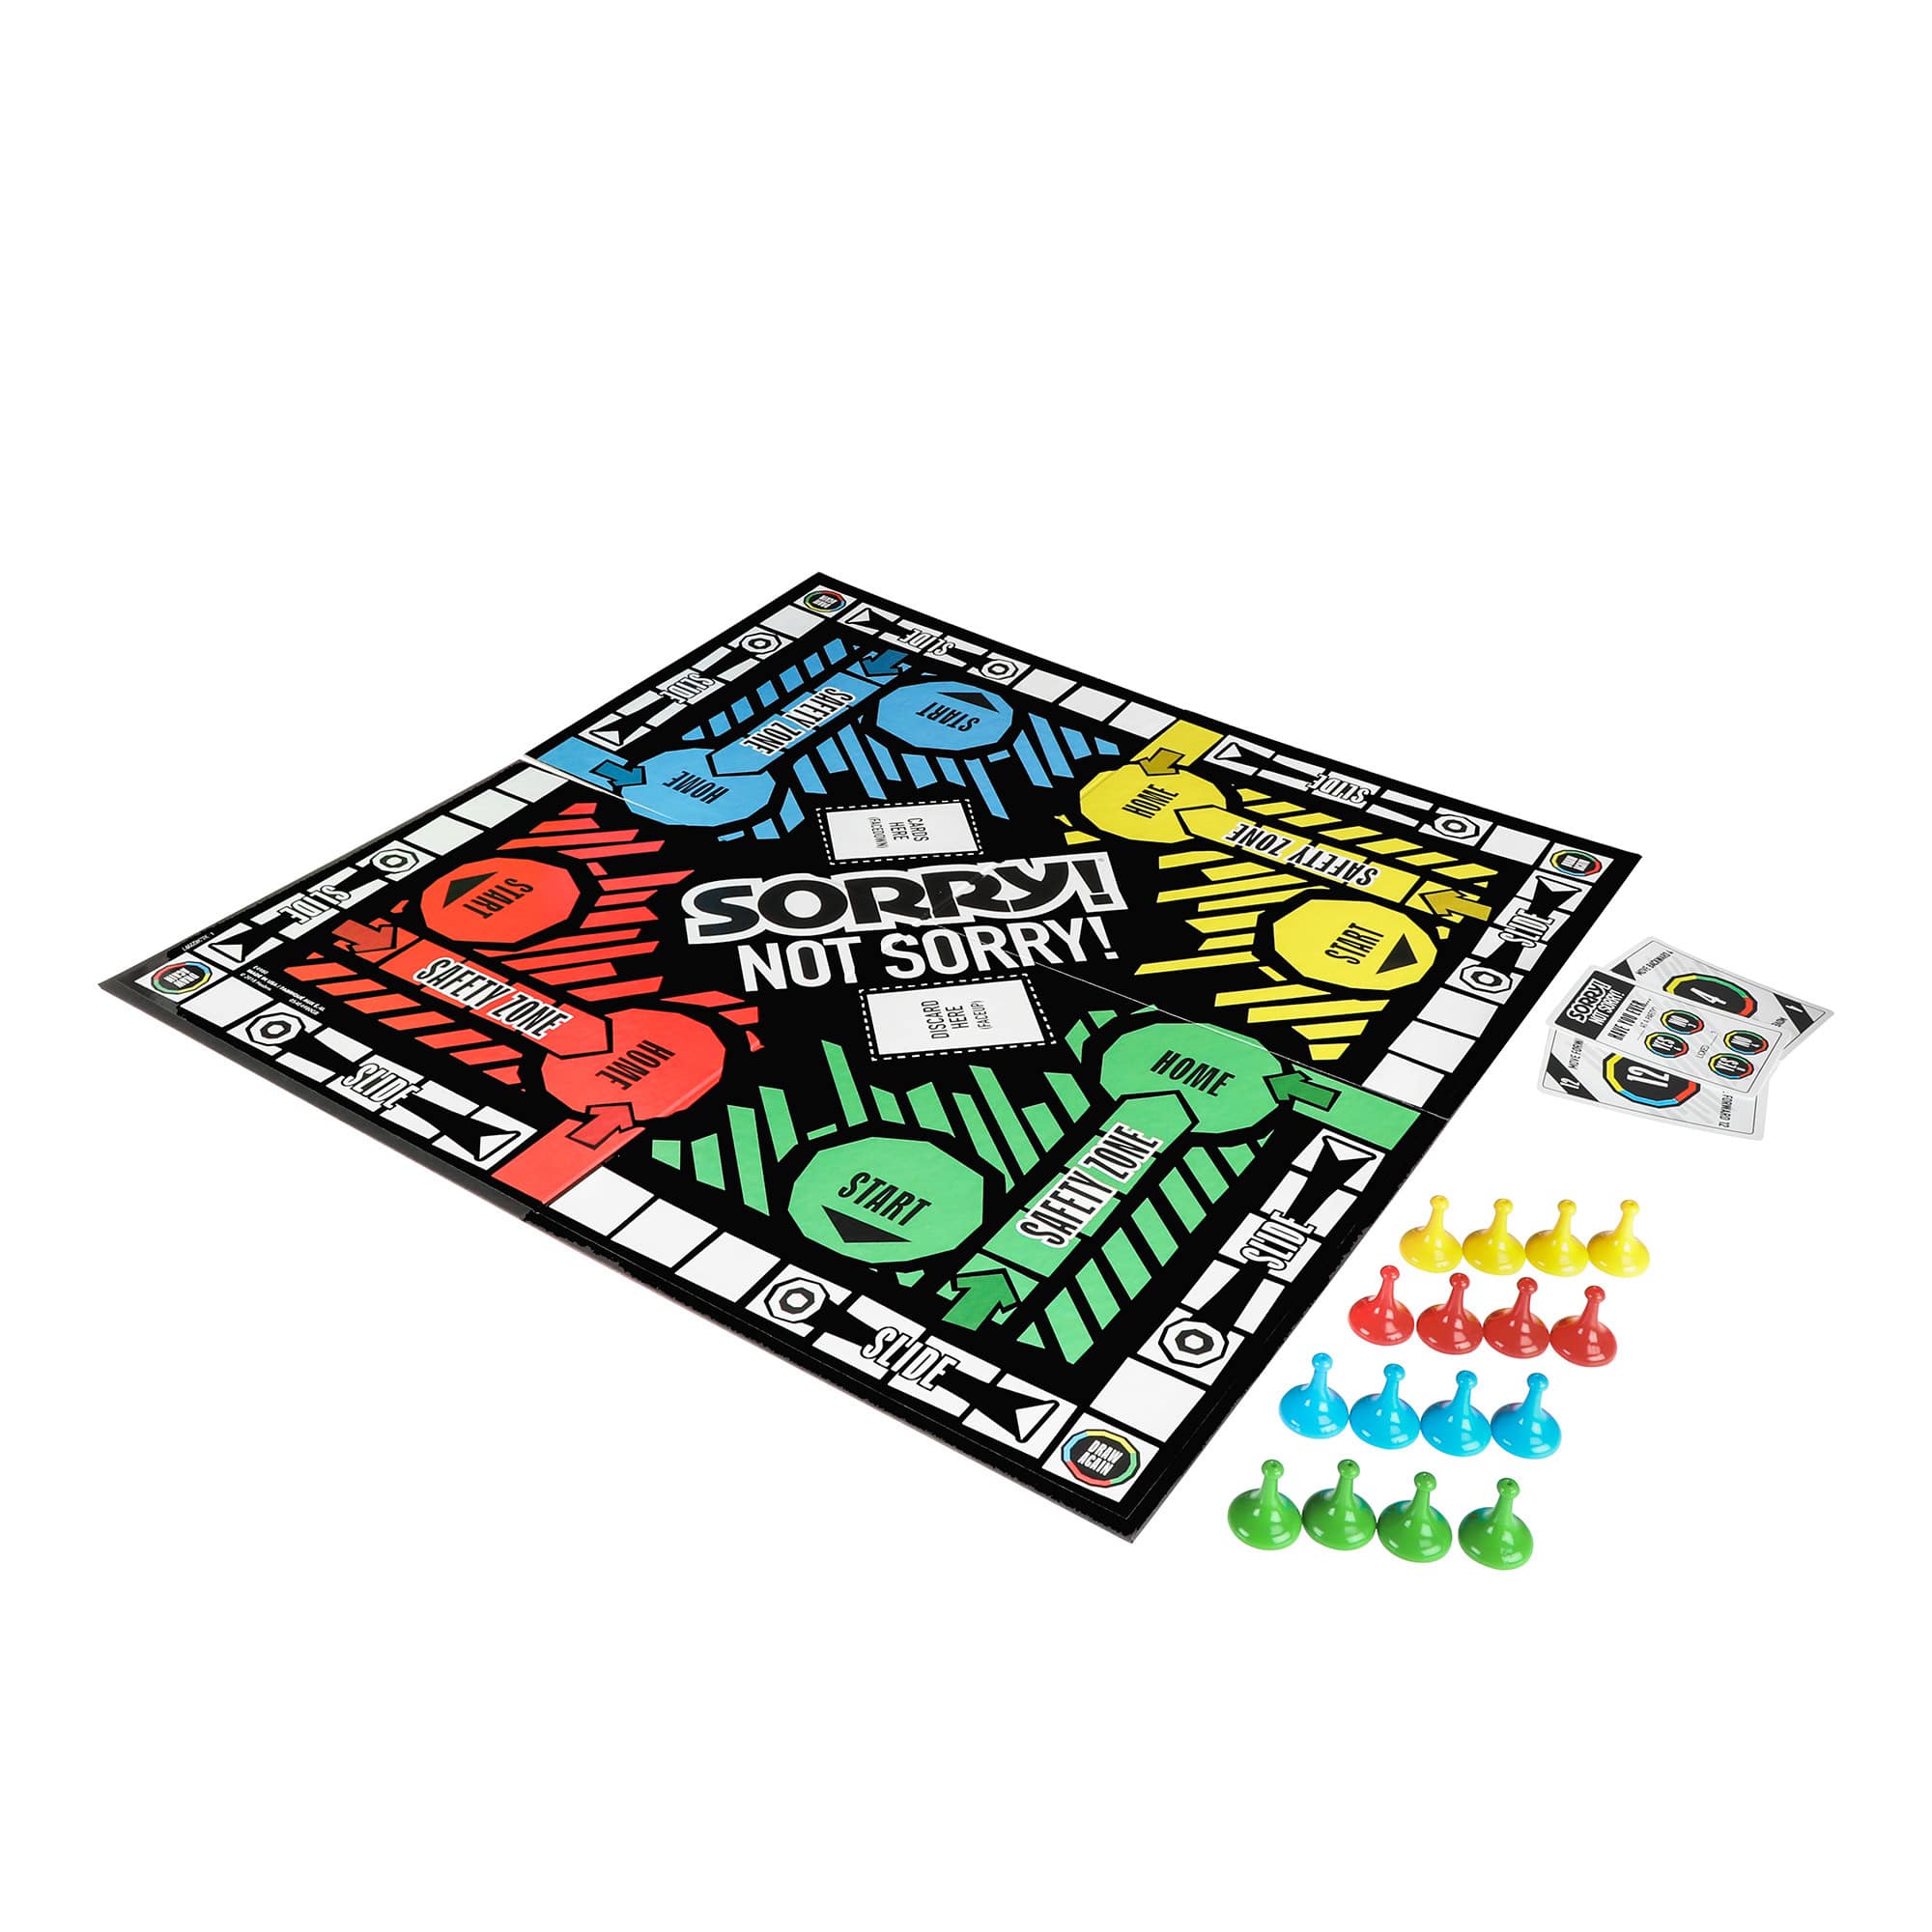 Sorry! Not Sorry! Adult Party Board Game